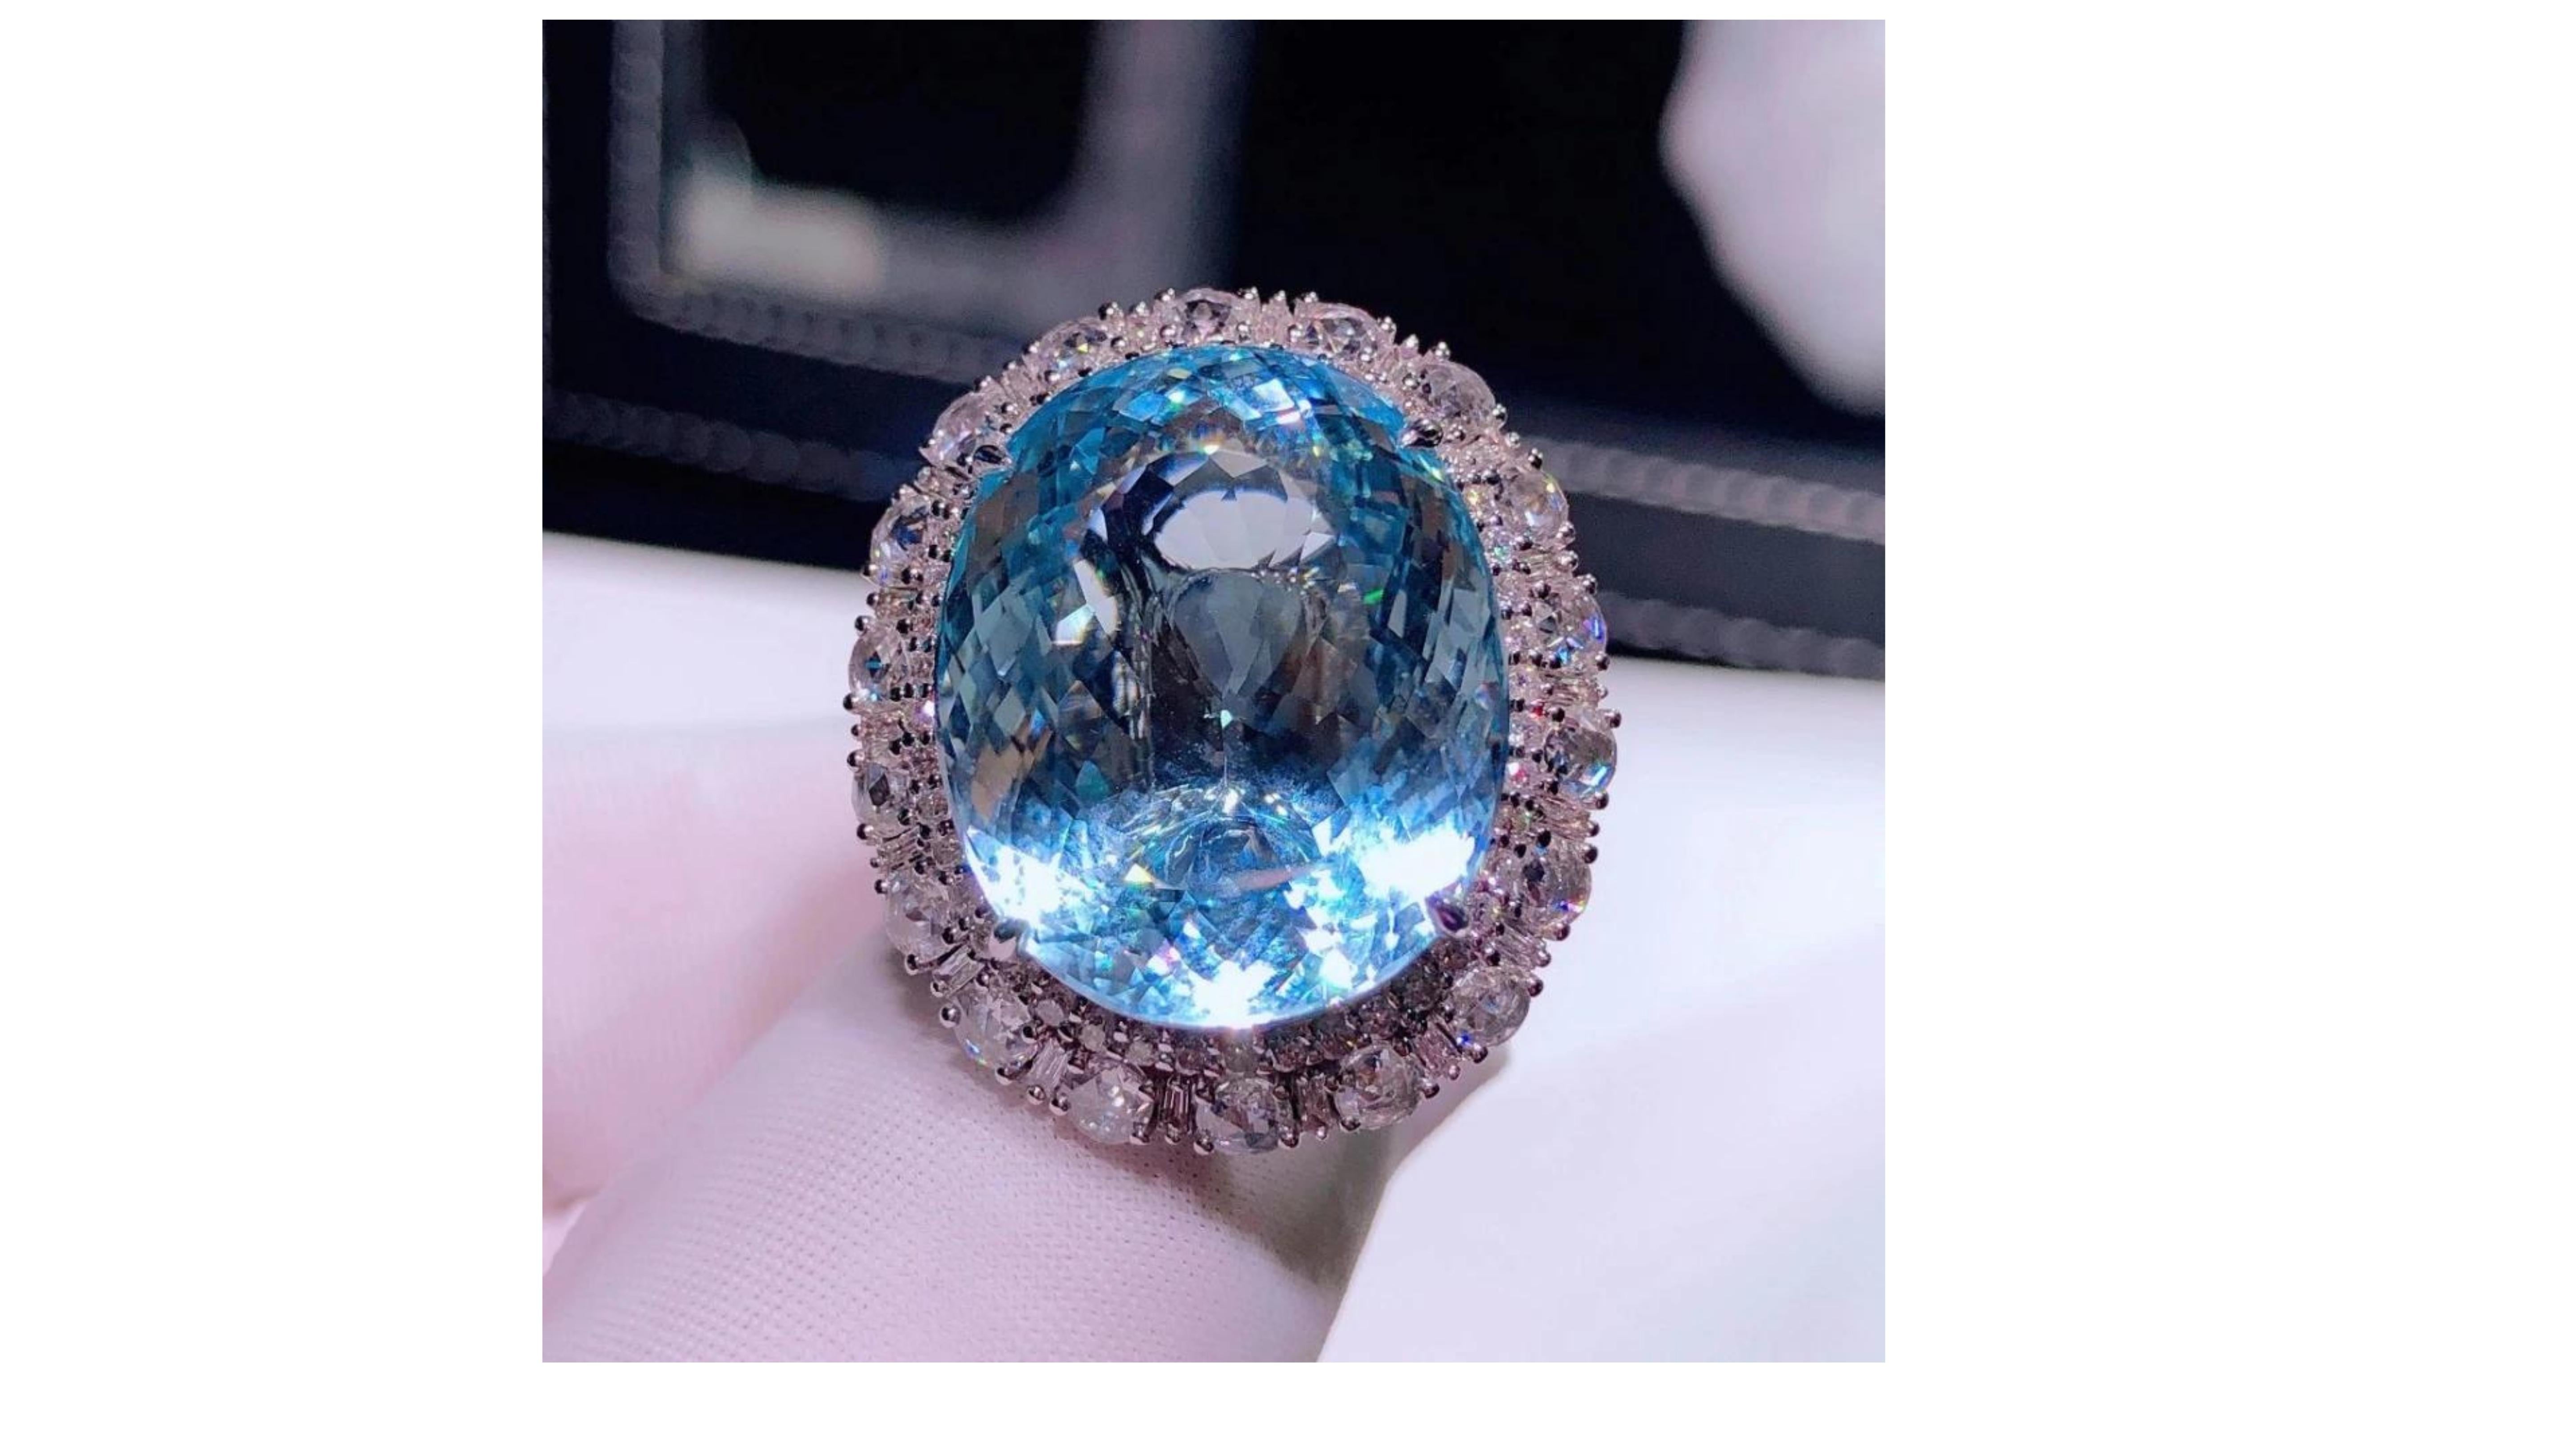 
This 25 Carat  Aquamarine Ring has 106 White Diamonds and is a wow factor as this Large Oval cut shape. Set in 18 Karat White Gold and it has duel use do can be a pendant too. 

Aquamarine with diamonds at each side and sparkling like a crystal